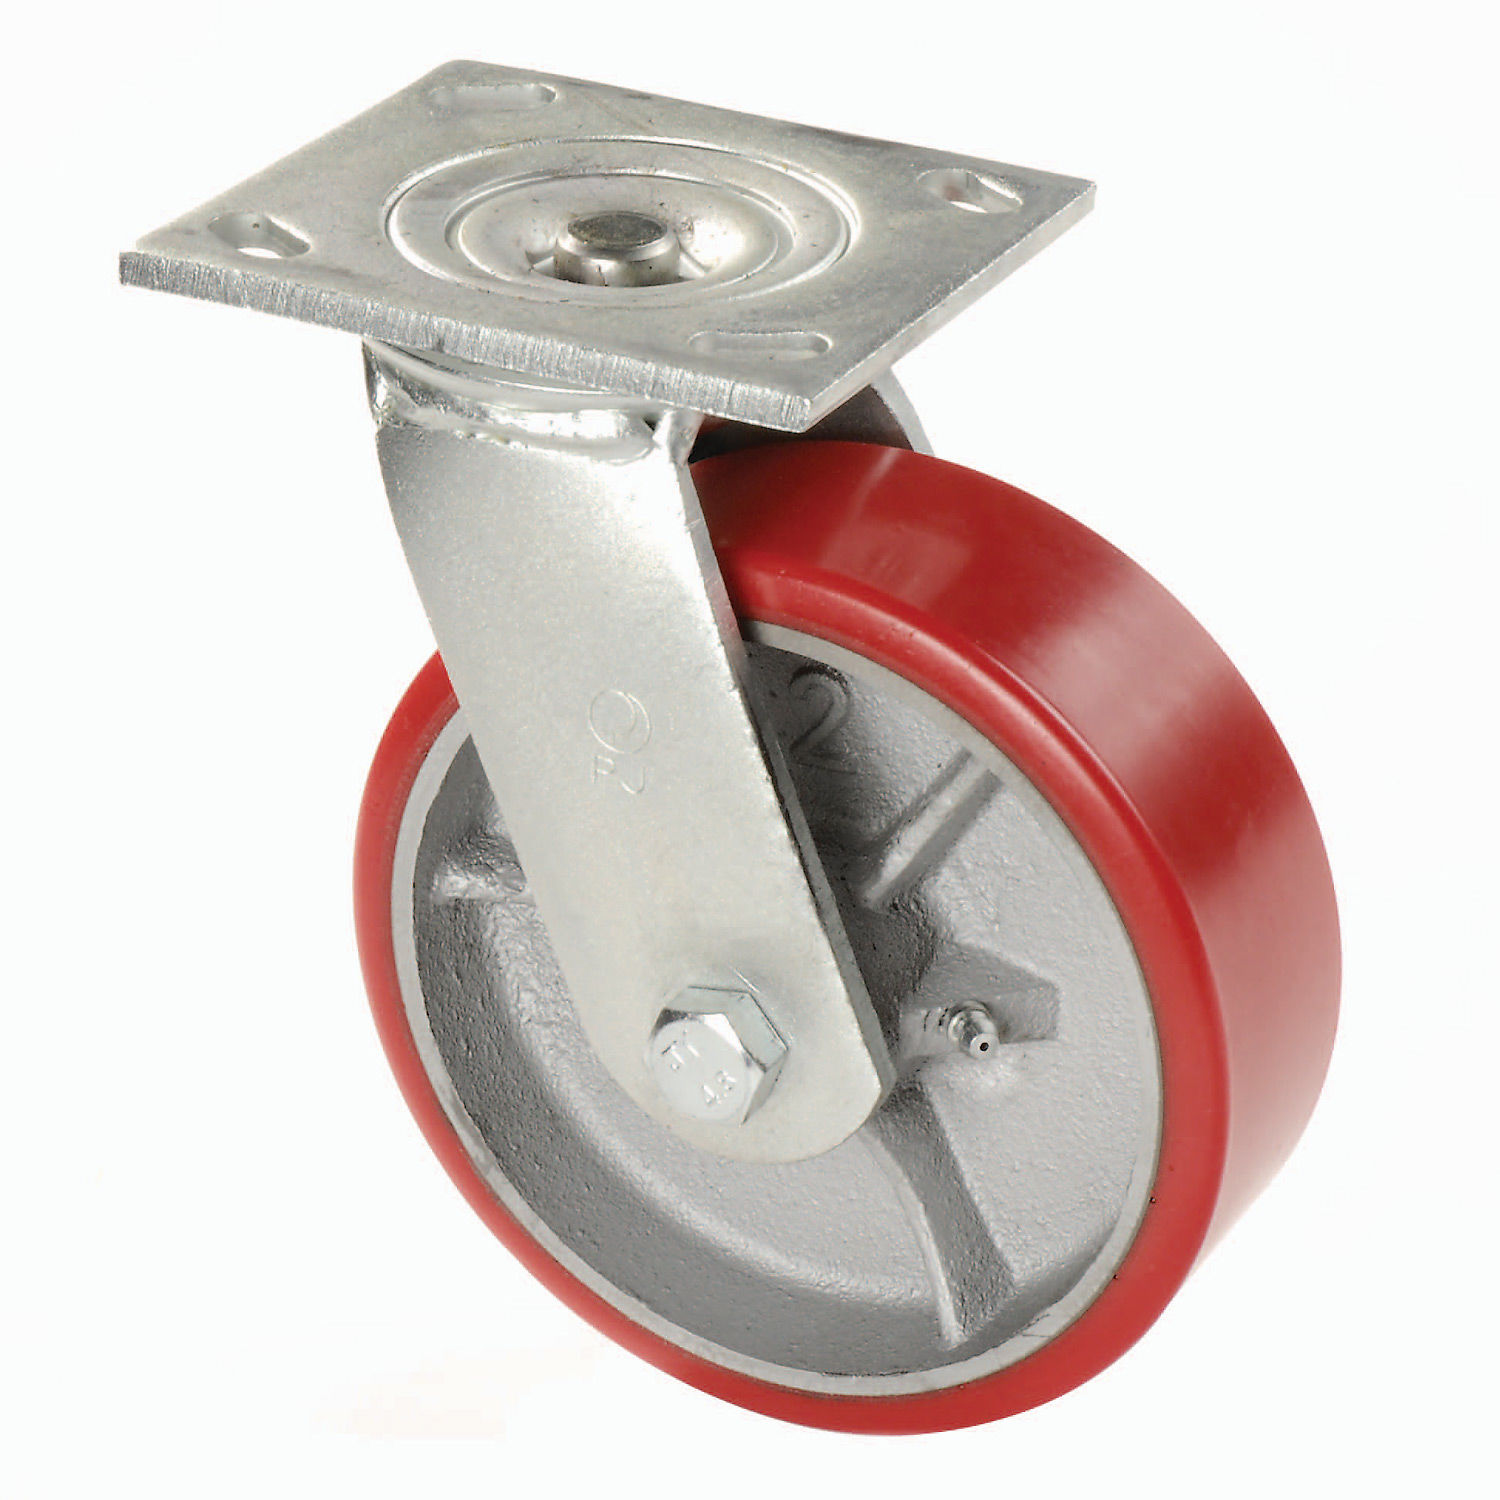 Get the Ideal Caster wheels in Melbourne and Sydney